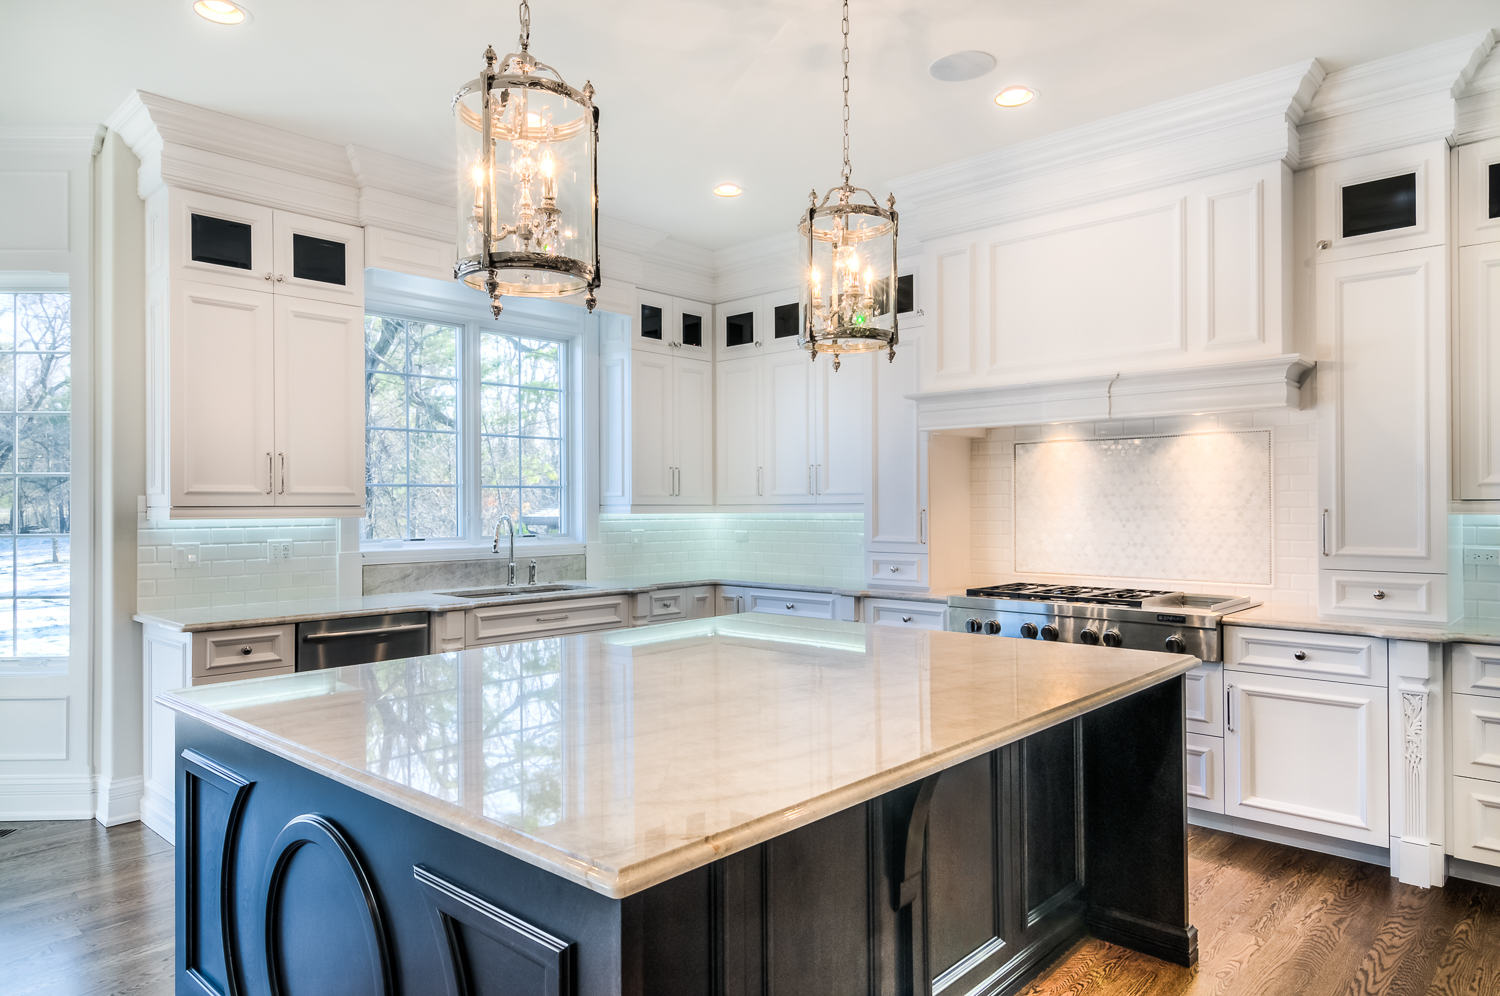 A modern kitchen featuring granite countertops from NEKA